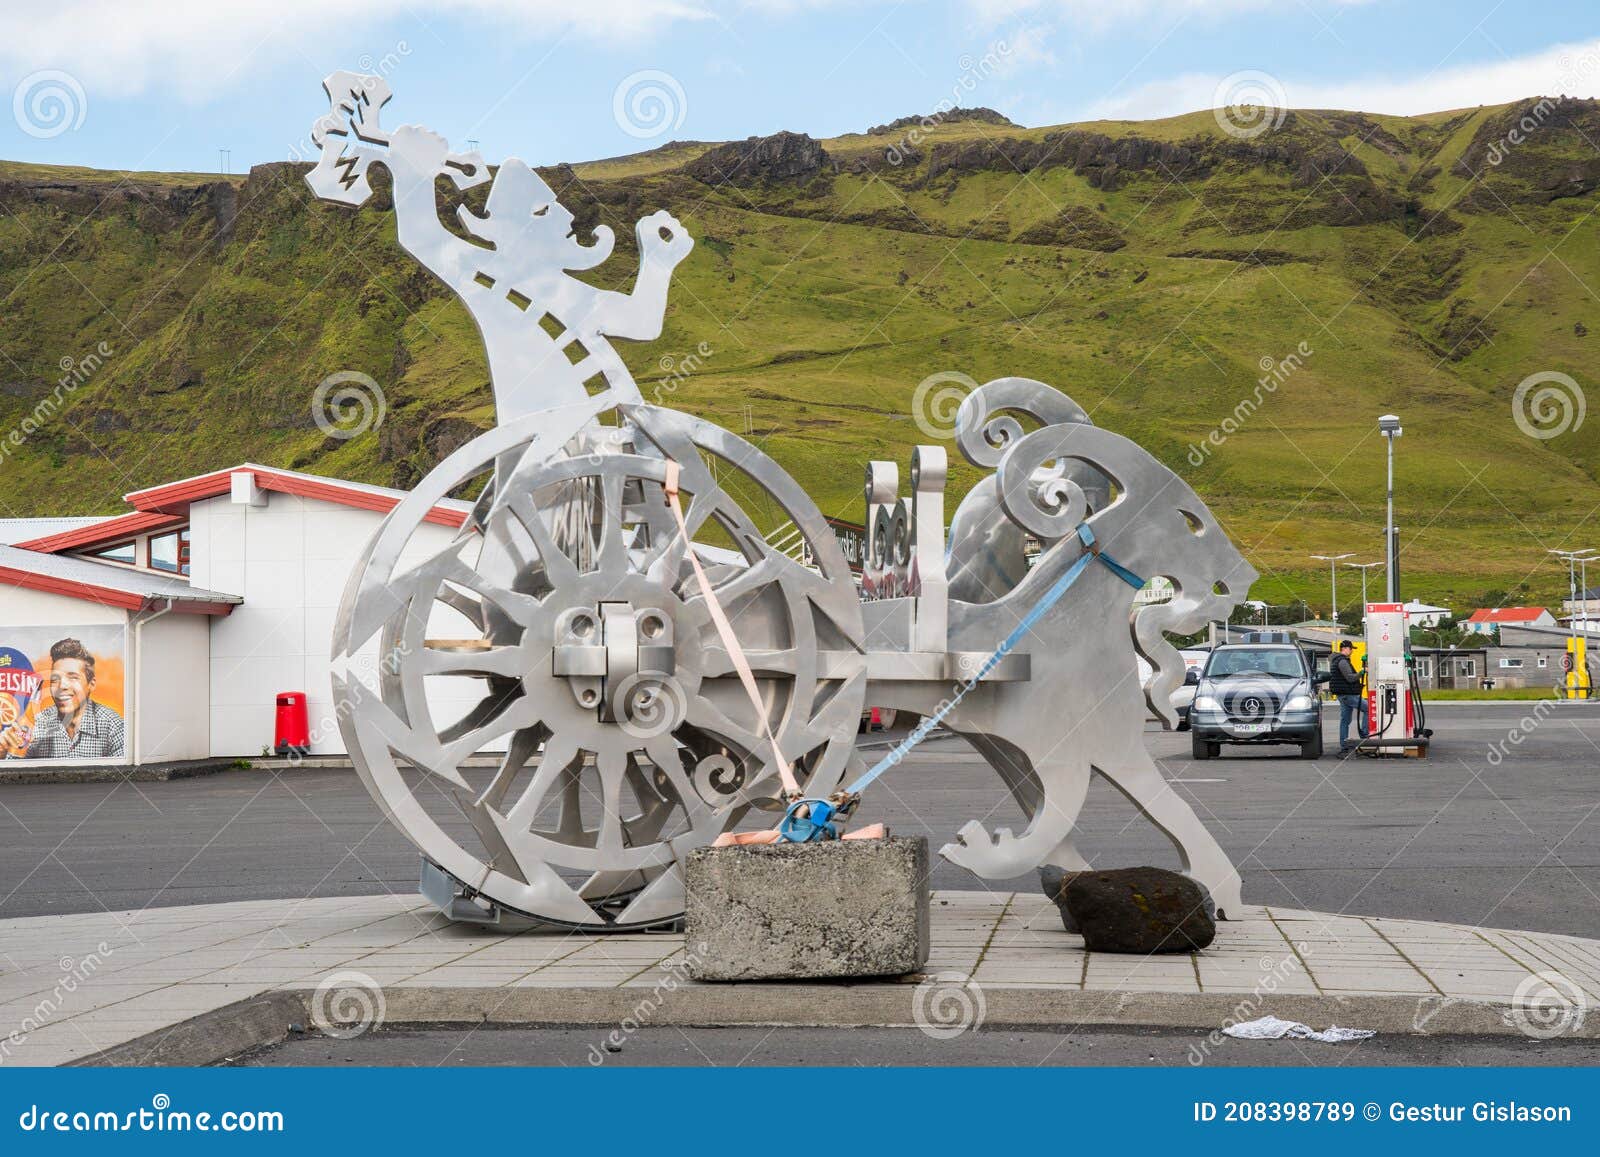 Thor The God Of Thunder Riding His Cart Editorial Stock Image Image Of Iceland Village 987